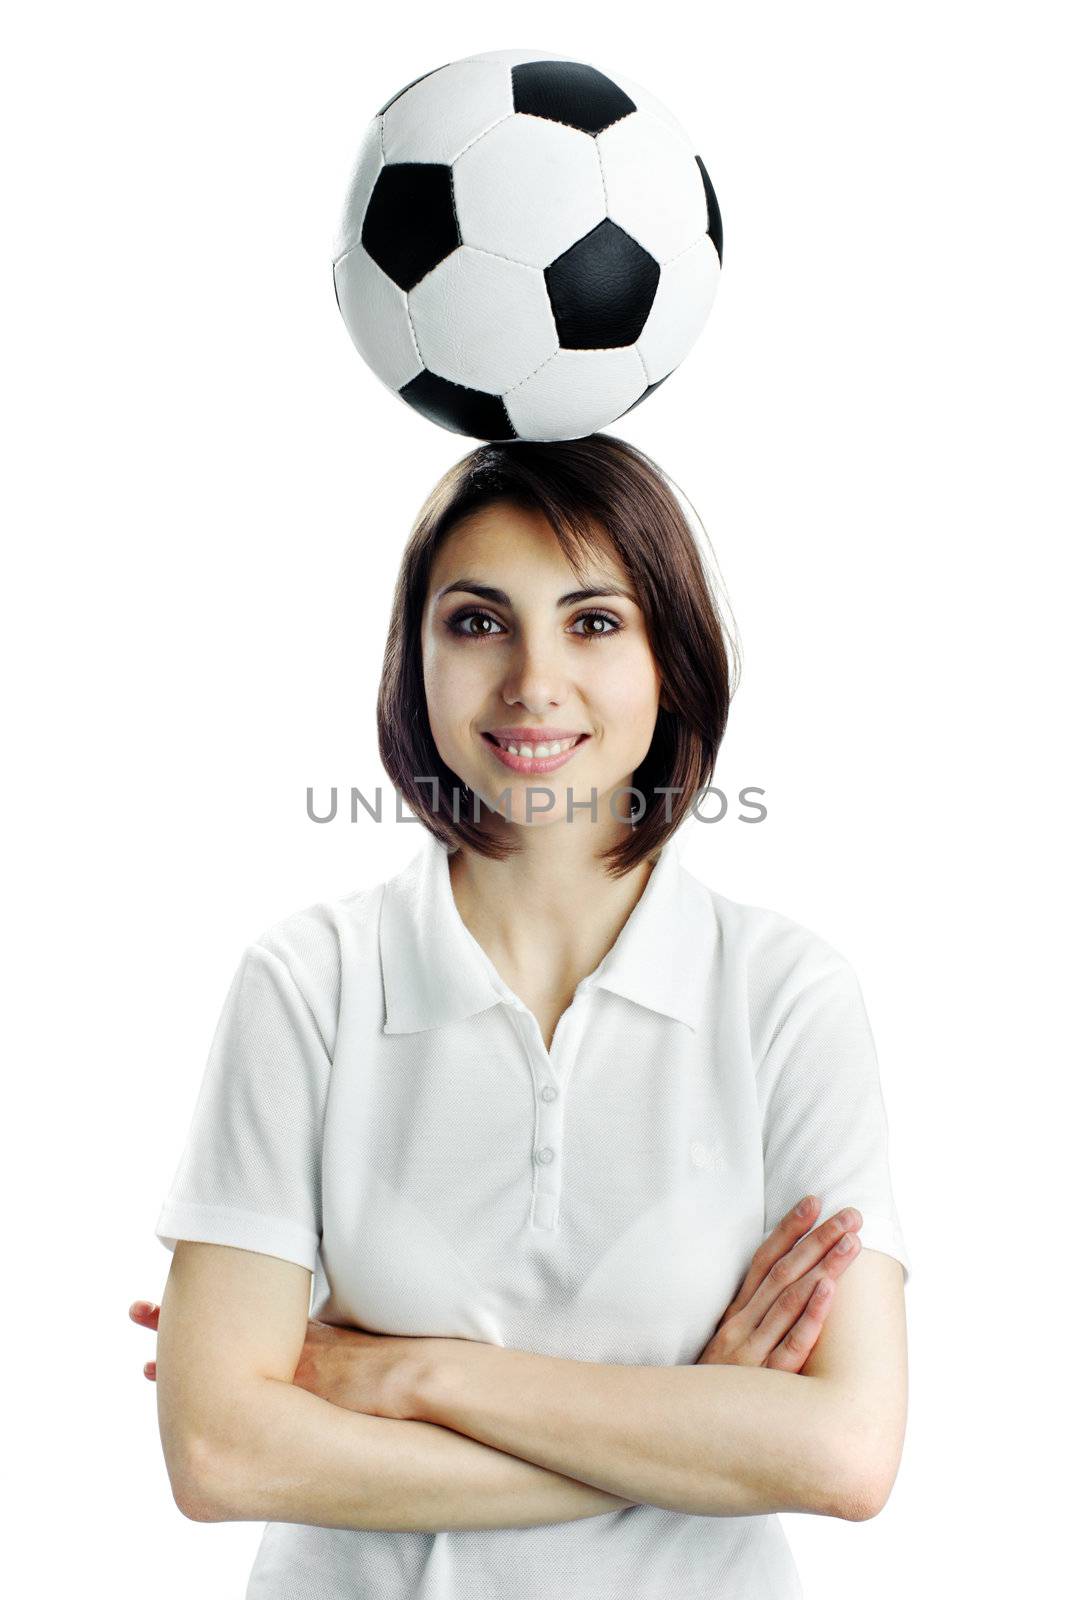 An image of of nice woman with soccer ball